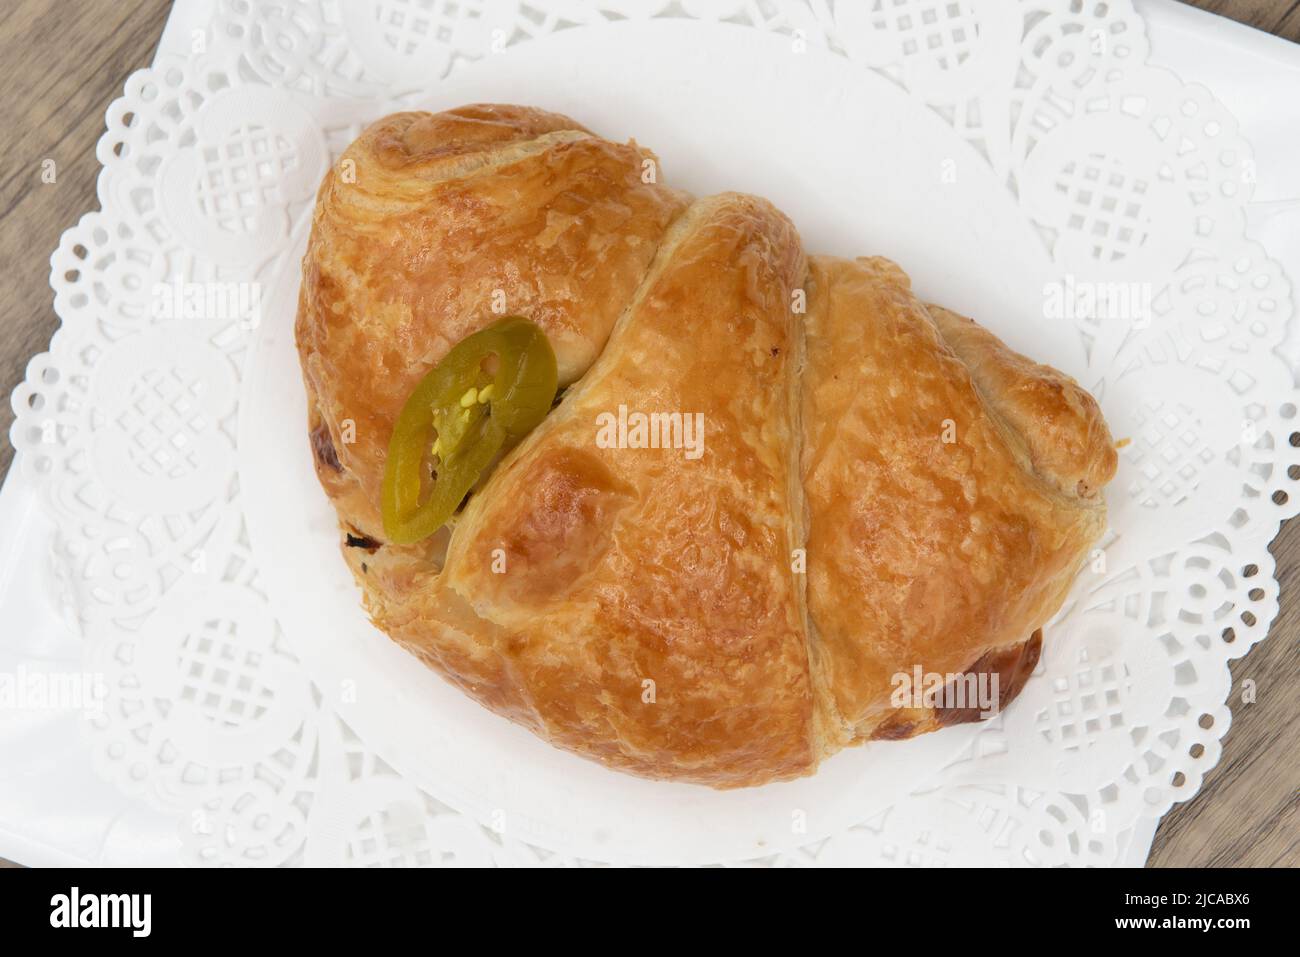 Overhead view of tempting fresh from the oven Ham and cheese jalapeno croissant sandwich from the bakery served on a plate. Stock Photo